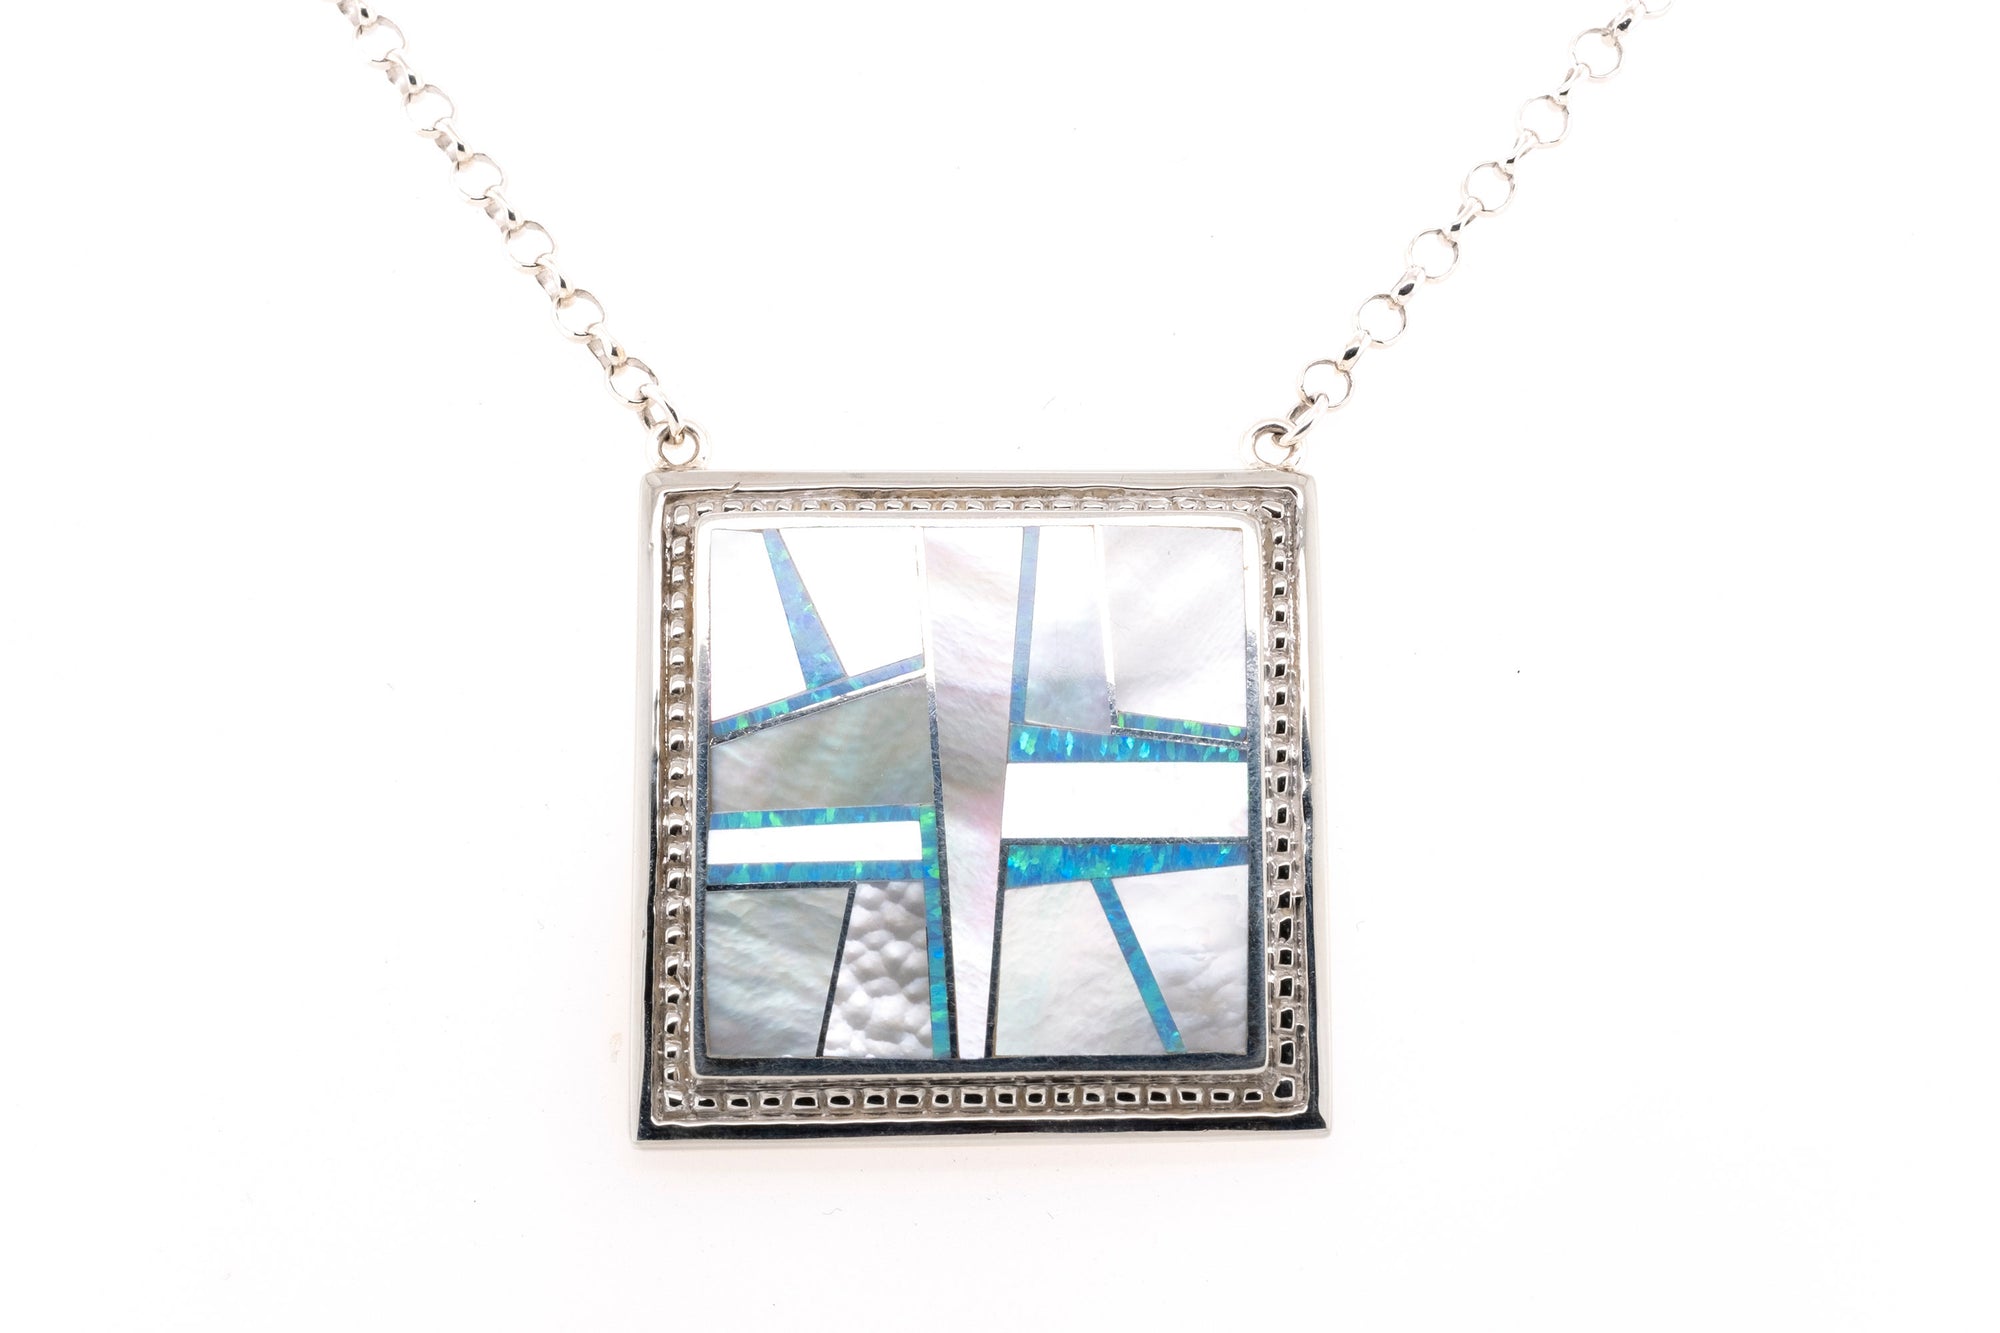 Mystic Pearl Square Necklace by David Rosales